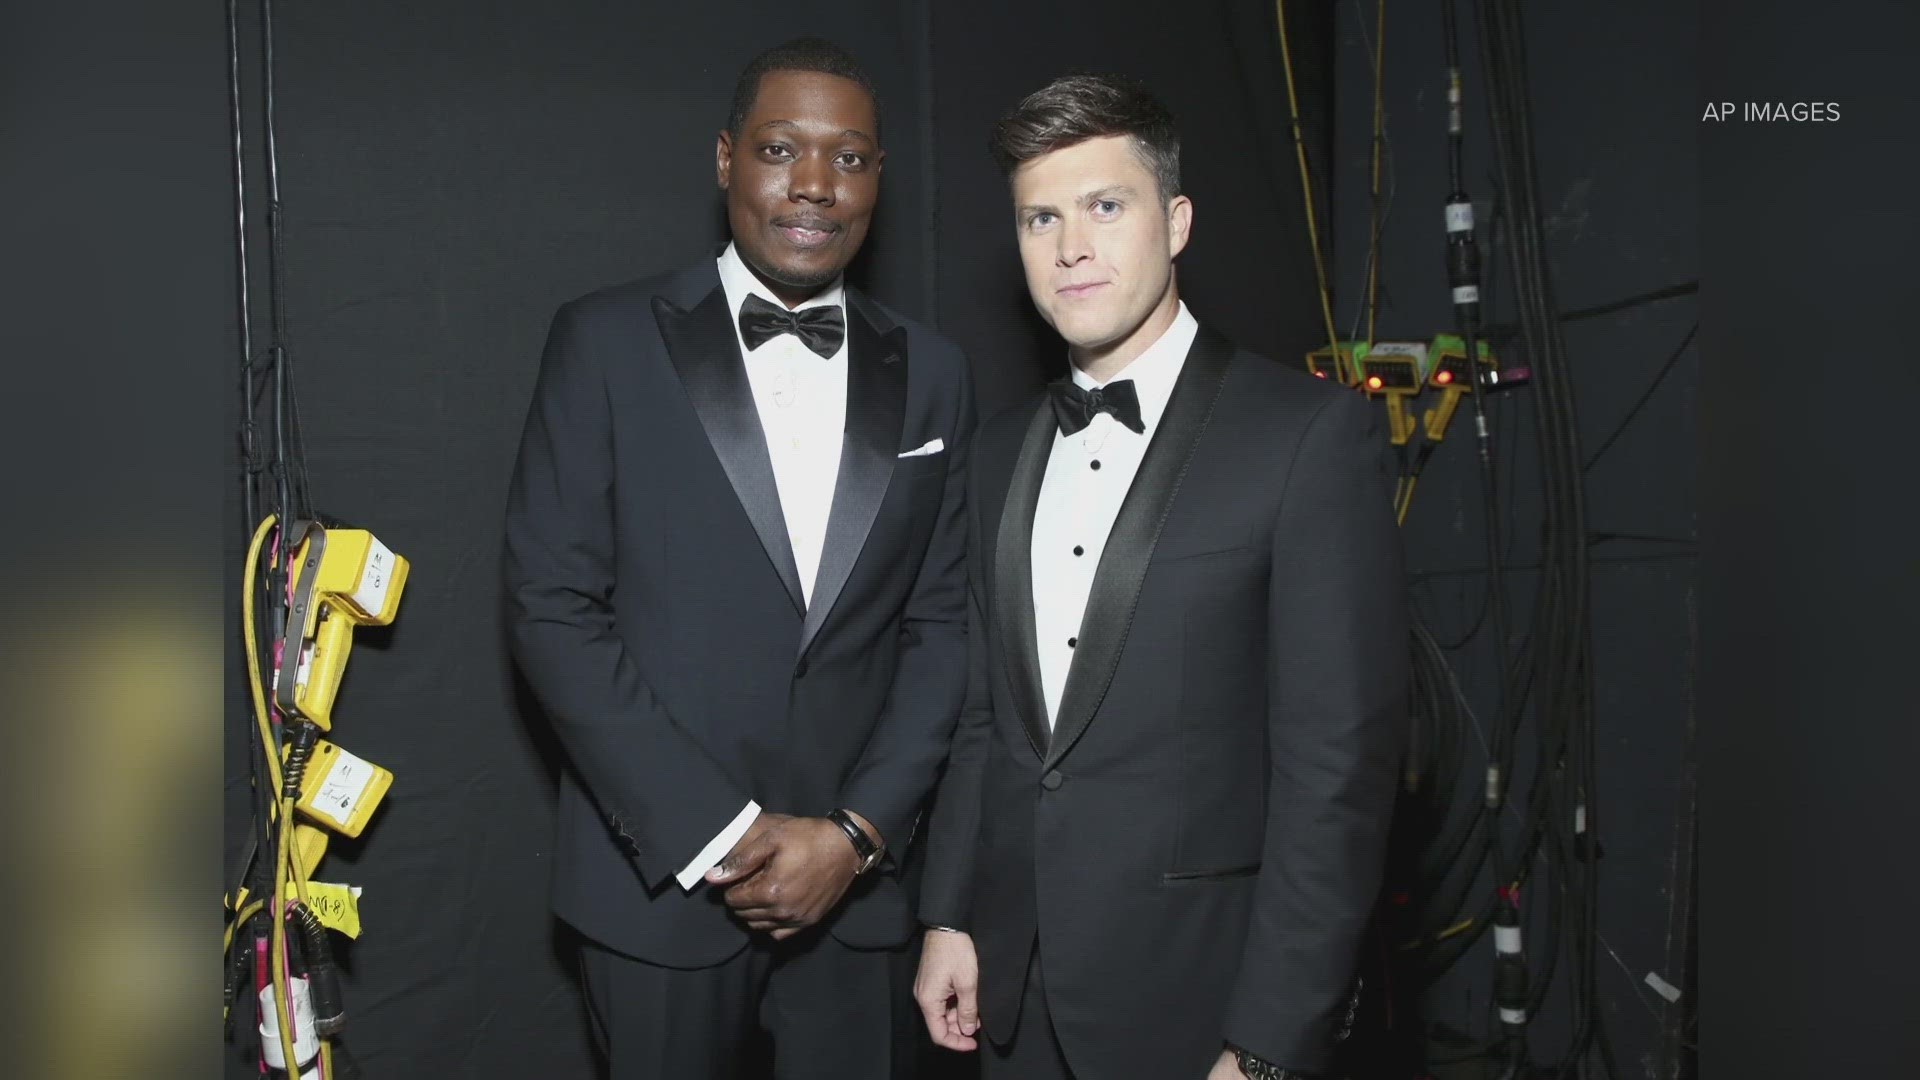 The co-anchors of “Saturday Night Live” SNL Weekend Update, Colin Jost and Michael Che, will make a stop at the Bellco Theatre on Saturday, Aug. 24.